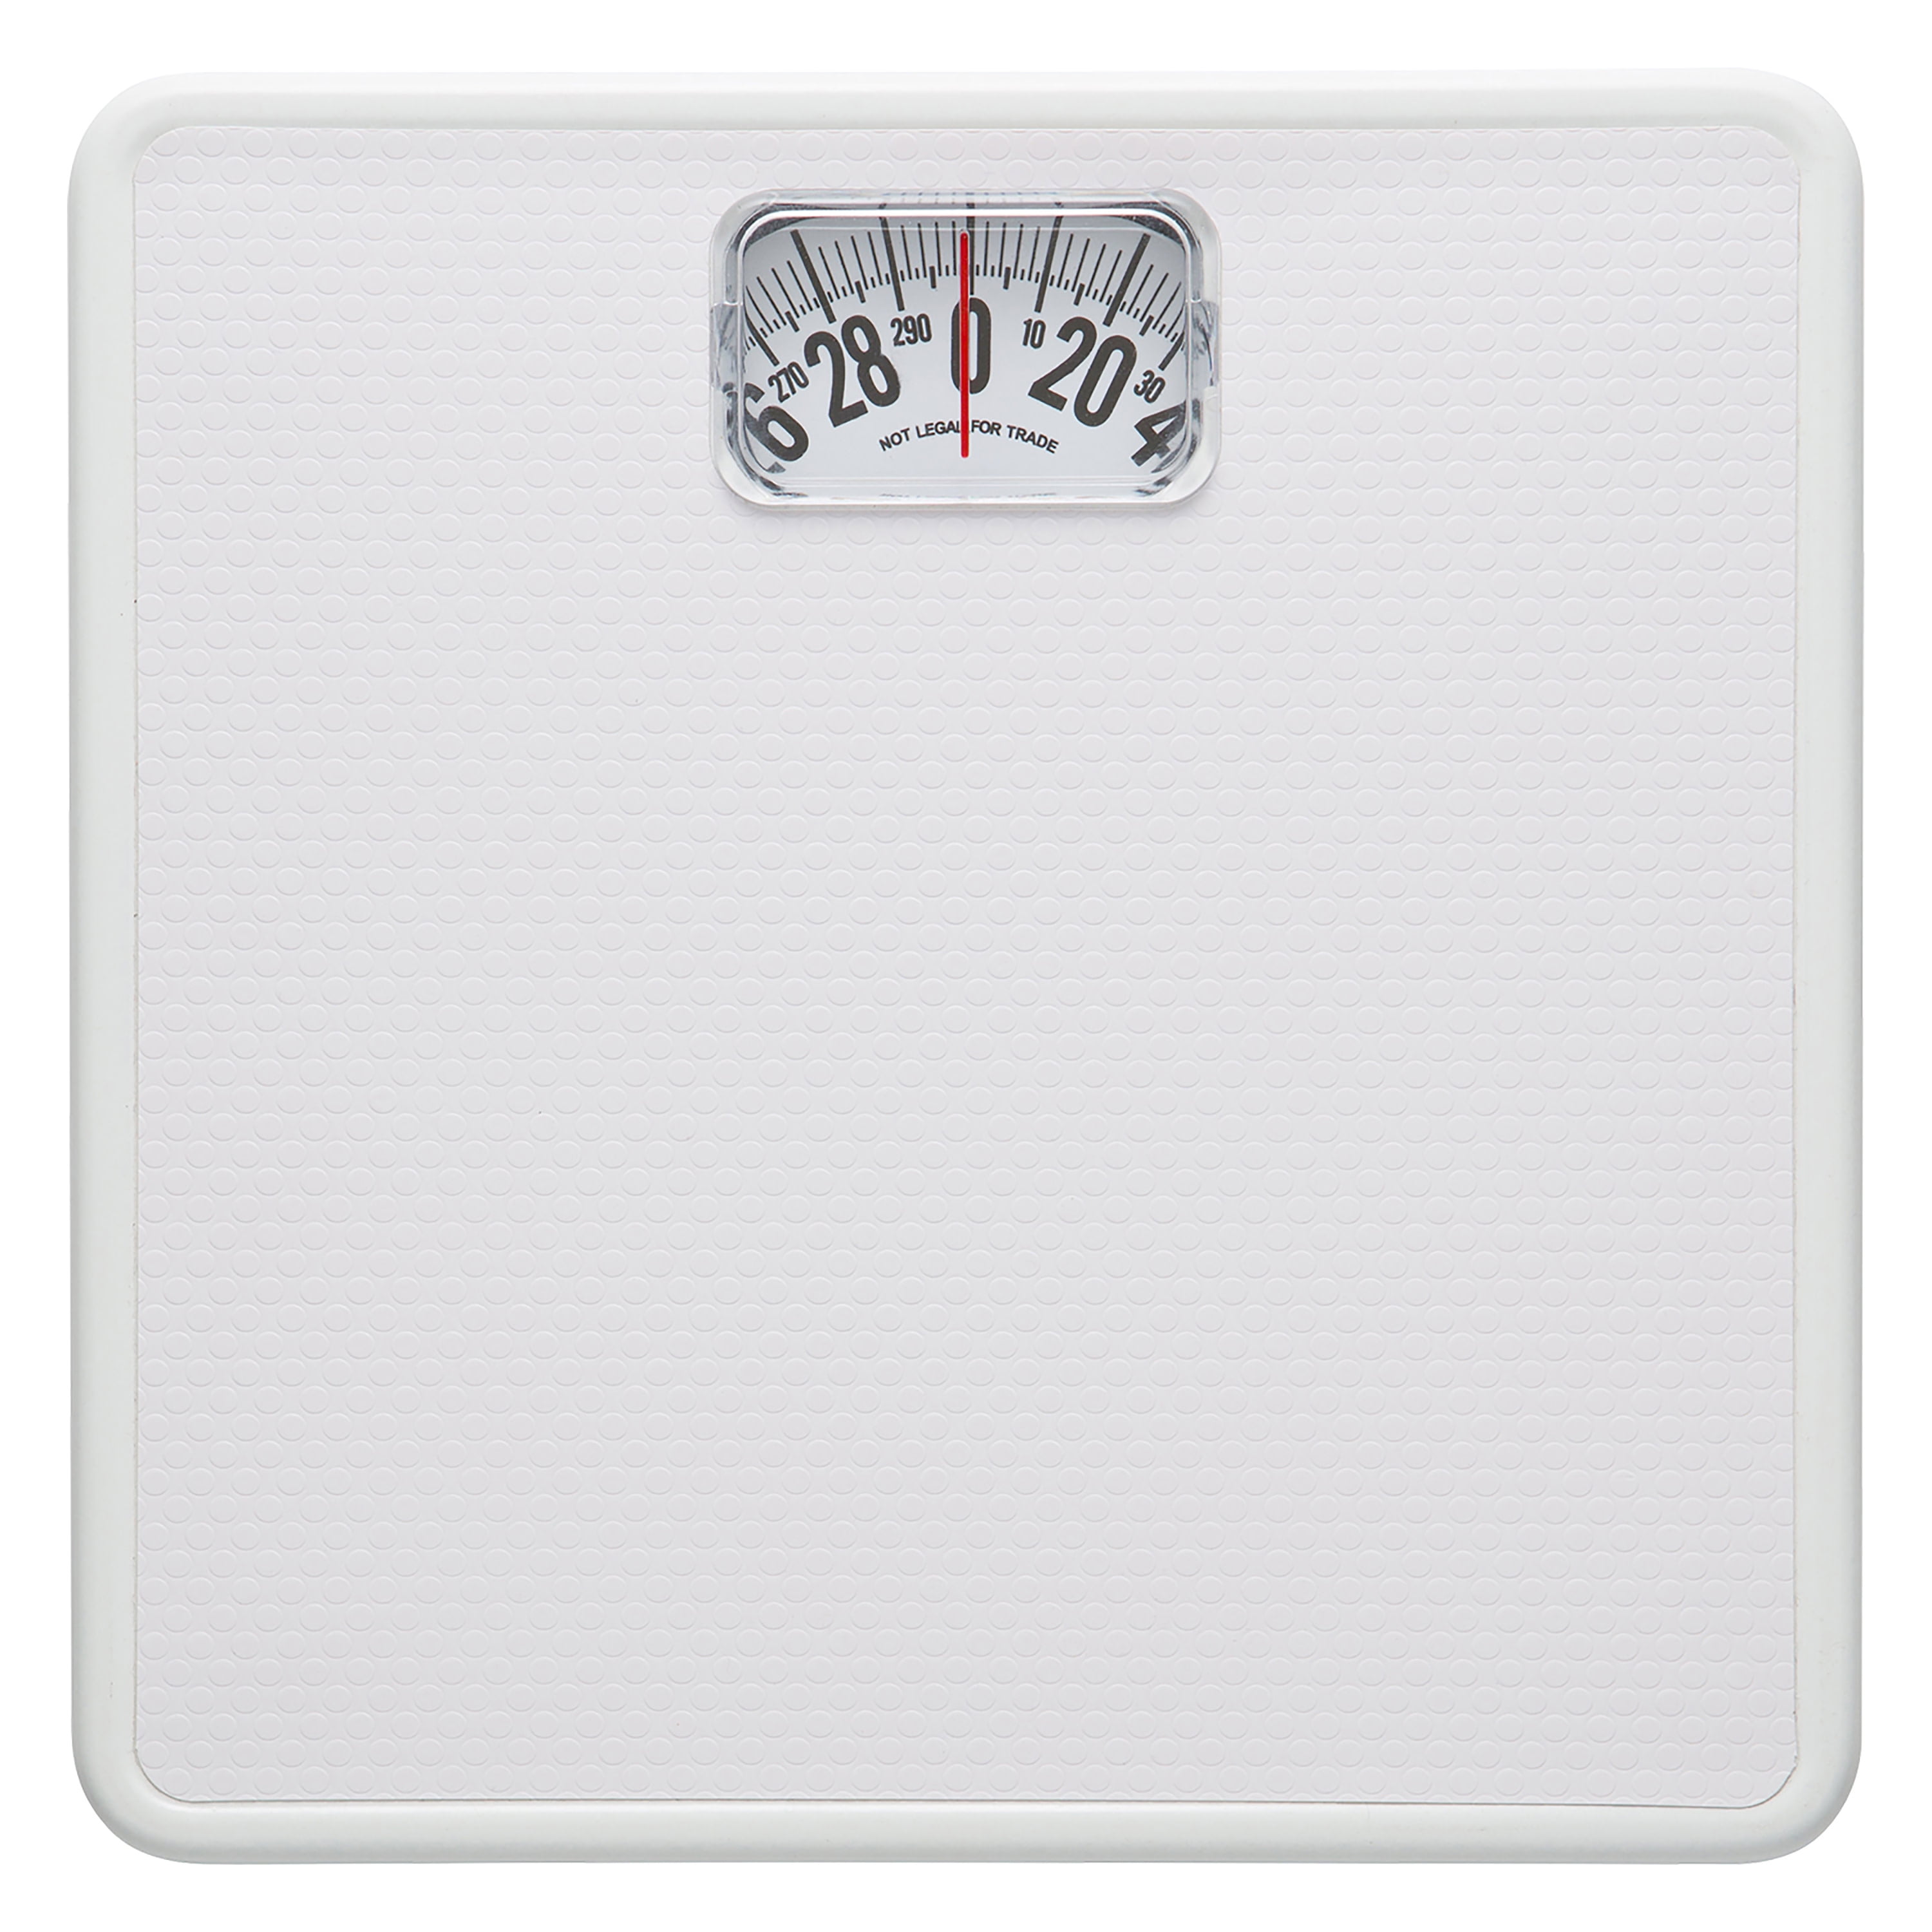 Analog Bathroom Scale with White Mat – Taylor USA